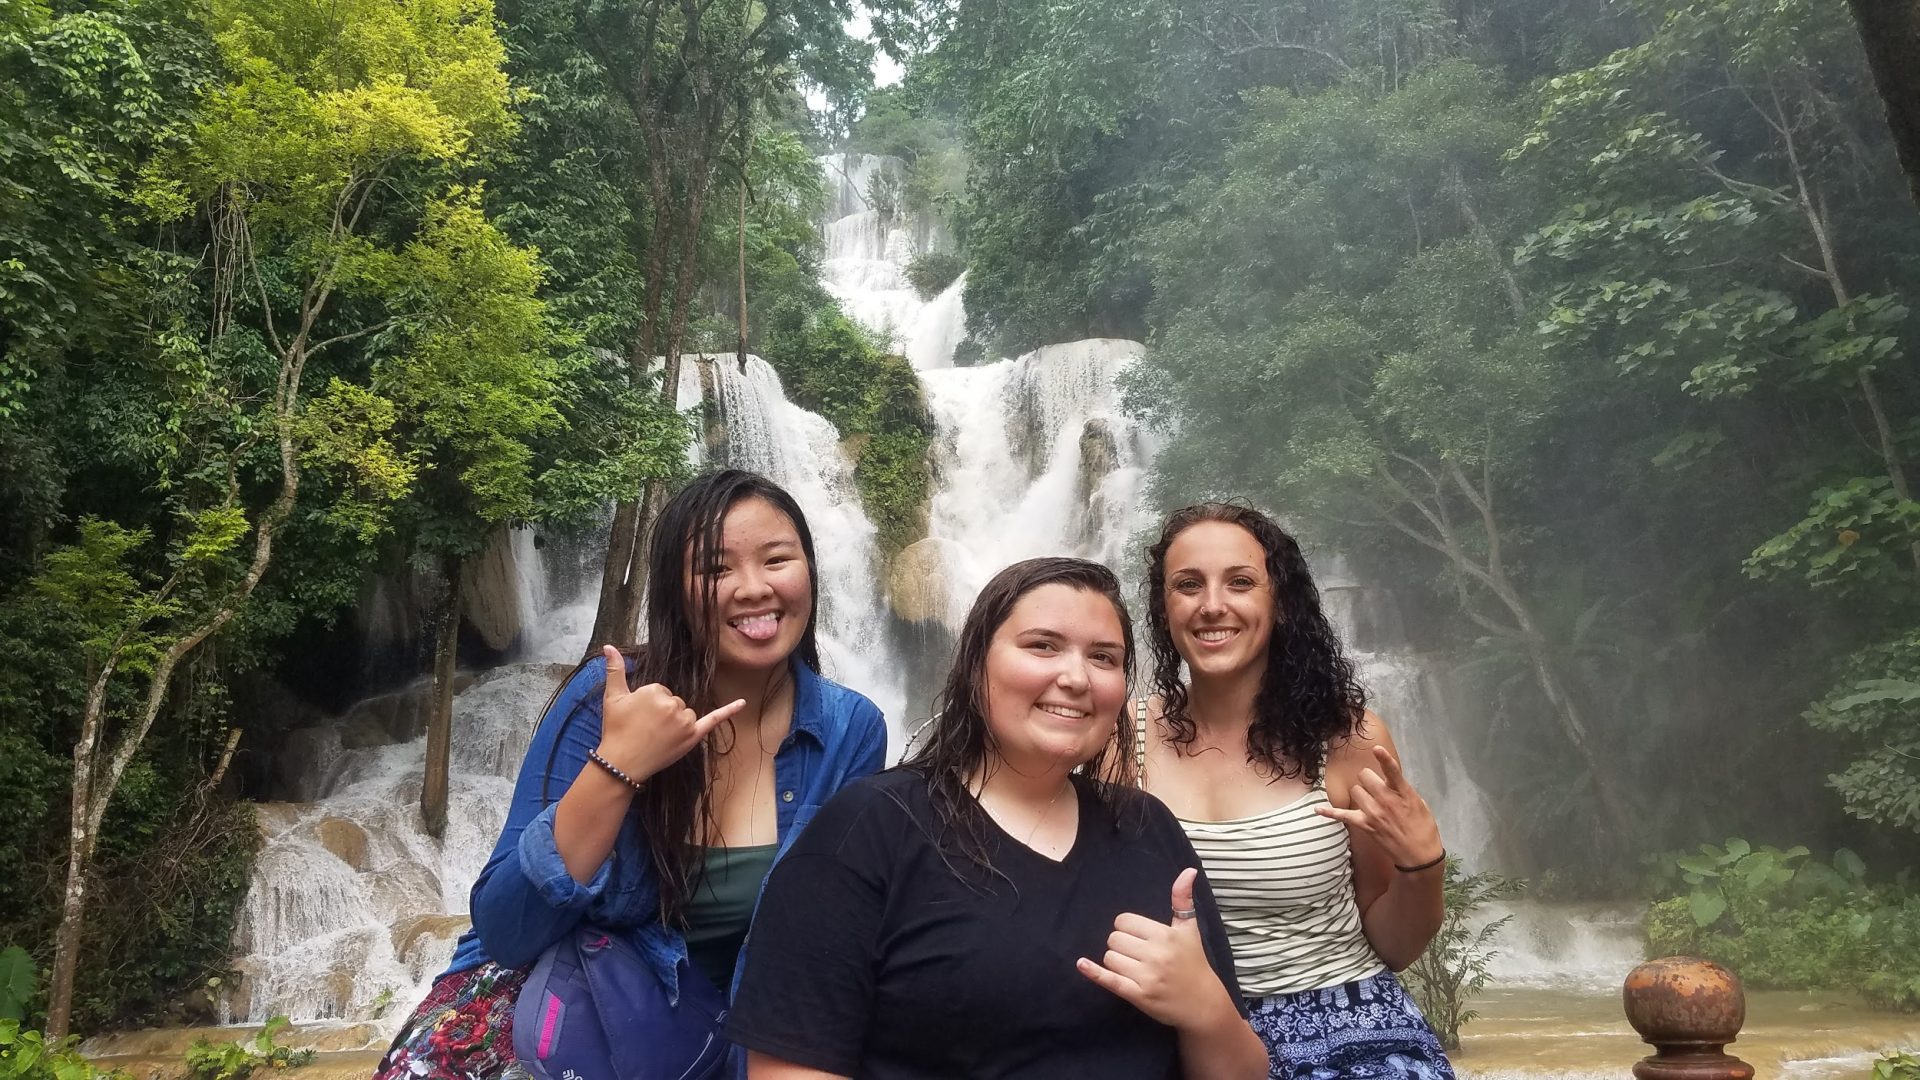 Group photo in front of waterfall